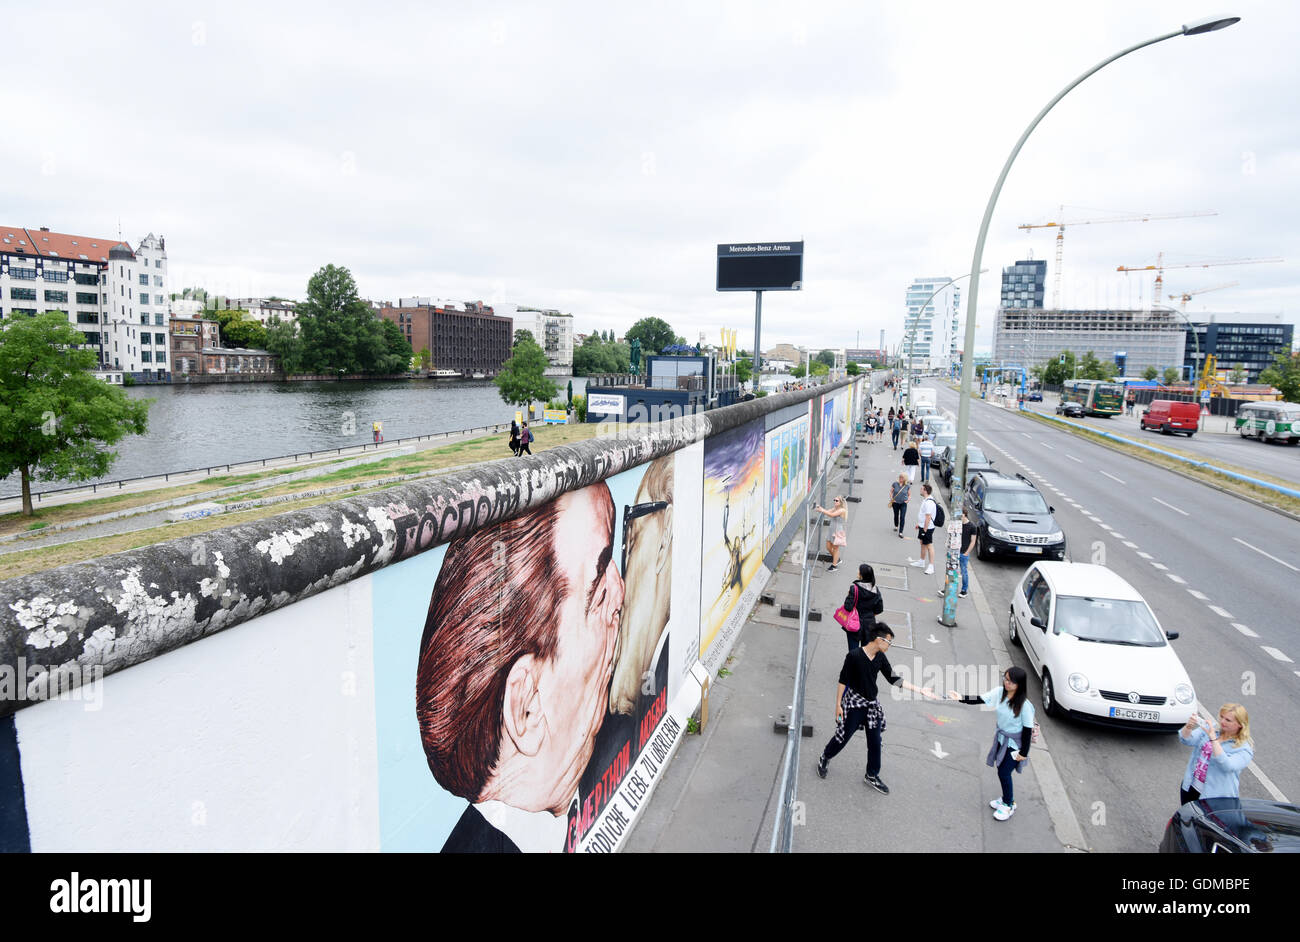 Tourists stand at the painting 'Fraternal Kiss betwen Leonid Breschnew and Erich Honecker' (also often called 'My God, Help Me to Survive This Deadly Love') by Dmitri Wladimirowitsch Wrubel at the East Side Gallery in Berlin, Germany, 19 July 2016. Since a few months the monument on the former inner-German border has been repaired and renovated due to numerous smearings on the artwork. The fence is meant to protect the painting from renewed damage by visitors. The local administration office Friedrichshain-Kreuzberg plans continuing to protect the artwork even after the renovation works. Photo Stock Photo